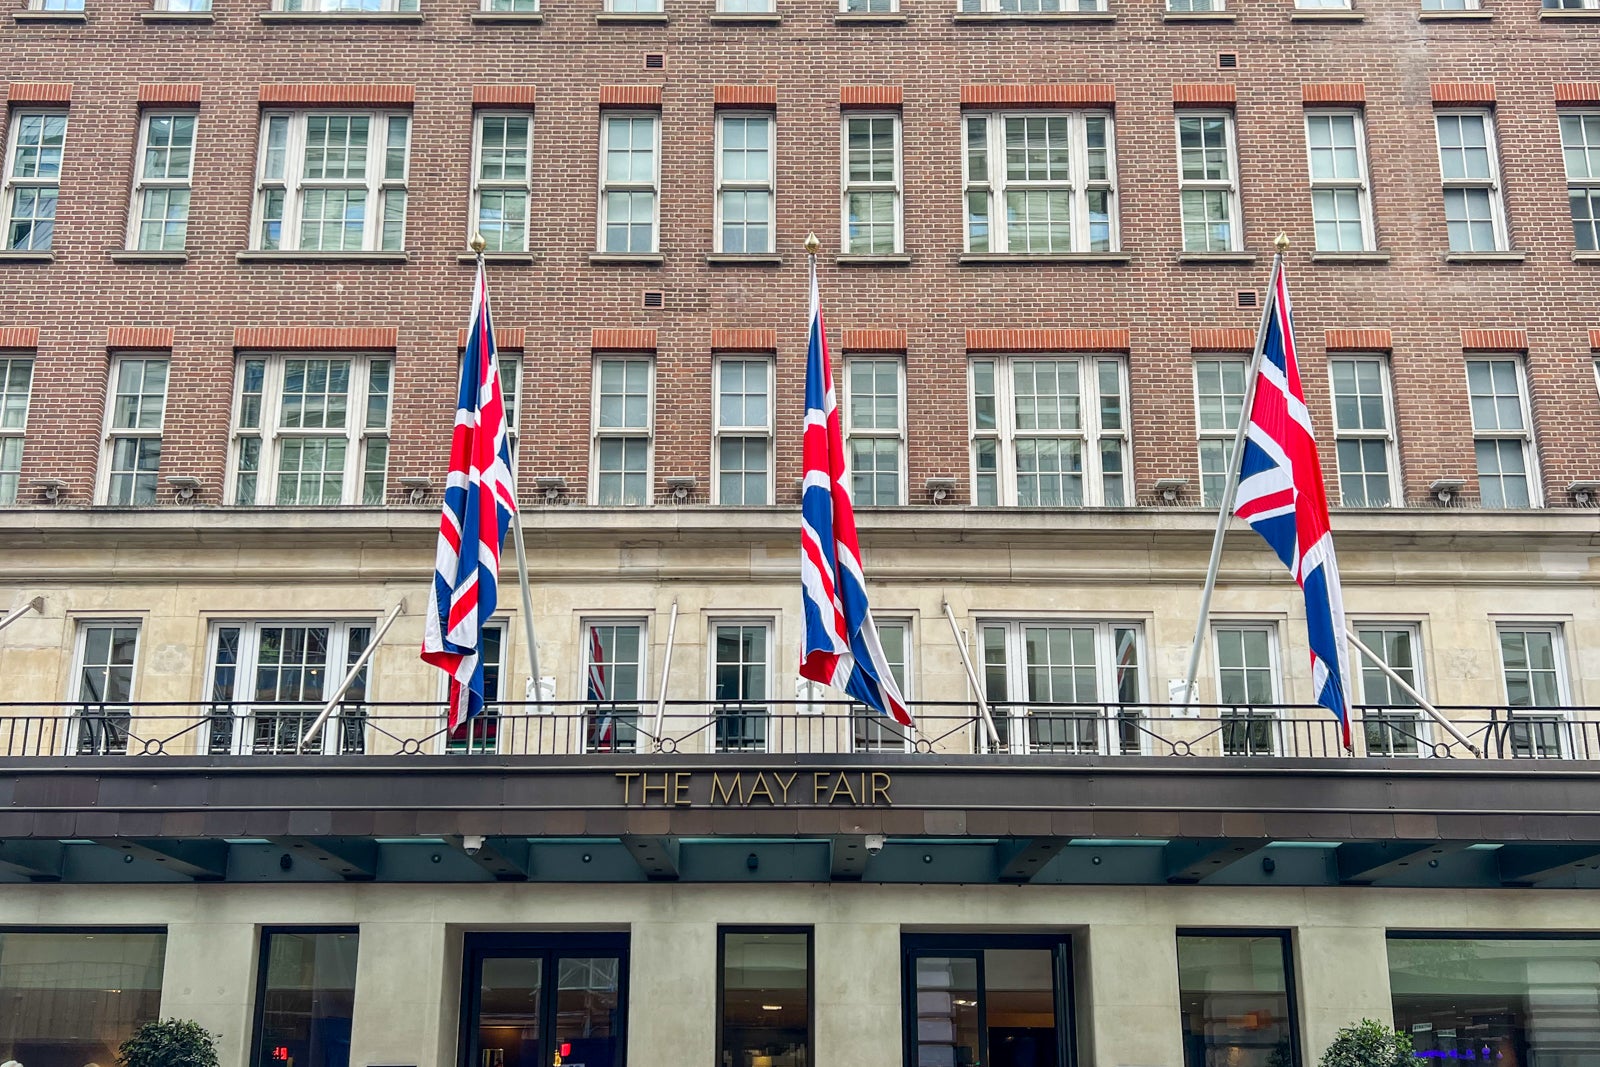 1 Hotel Mayfair hotel review